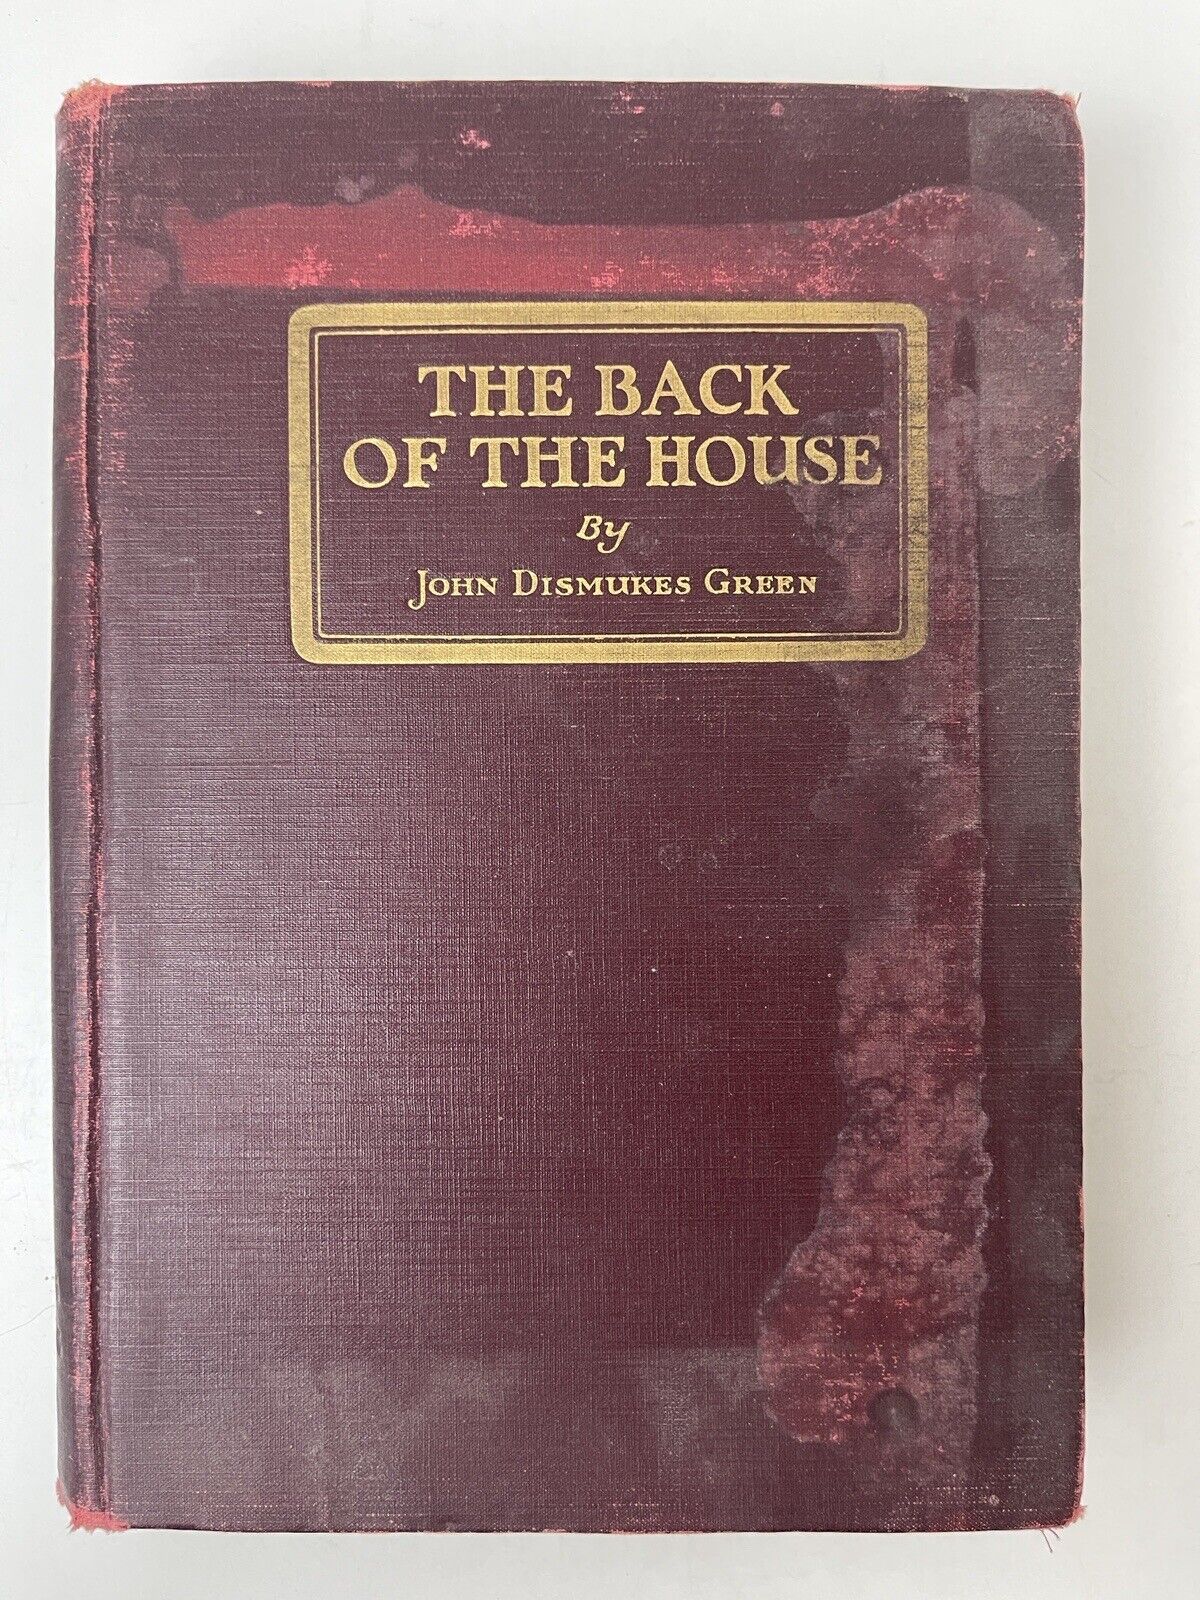 Vtg Book The Back of the The House John Dismukes Green 1925 HB Hotel Operation